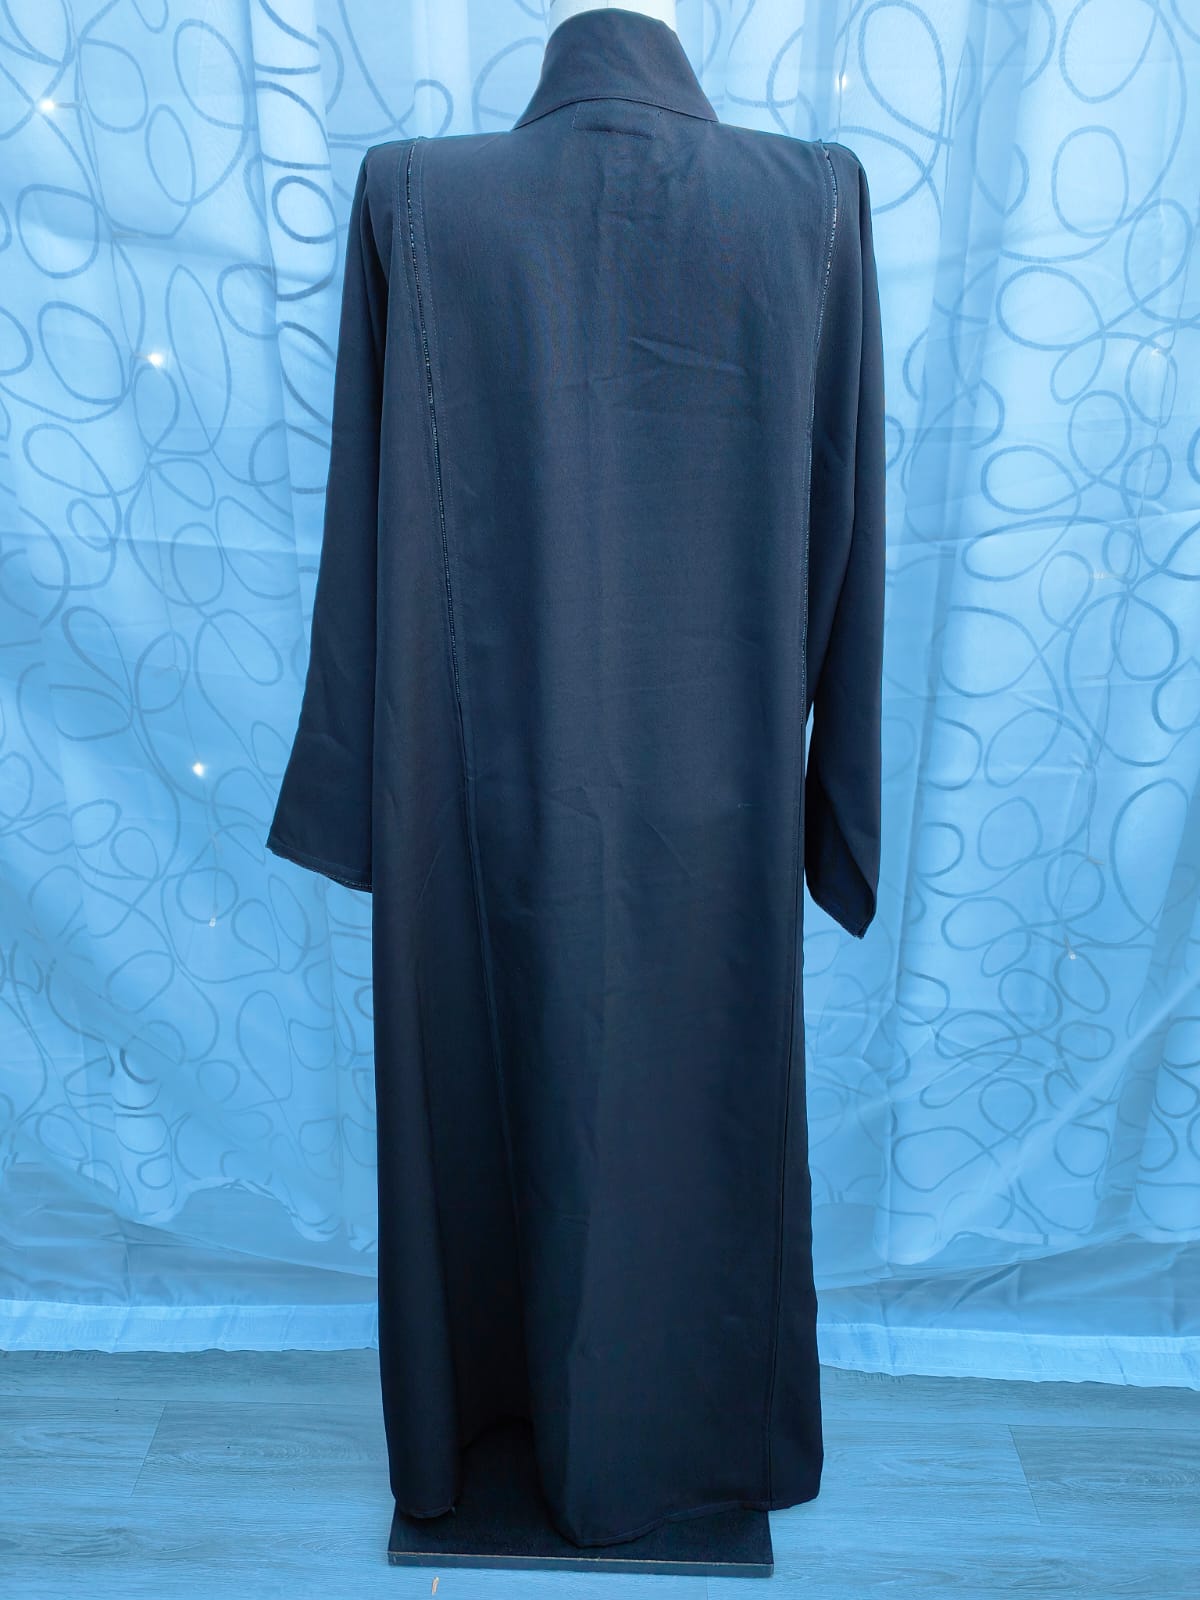 Discover the allure of our Exquisite Black Burqa Abaya - a blend of modern style and traditional modesty, exclusively available at Hikmah Boutique. Perfect for various occasions, this abaya exudes sophistication.